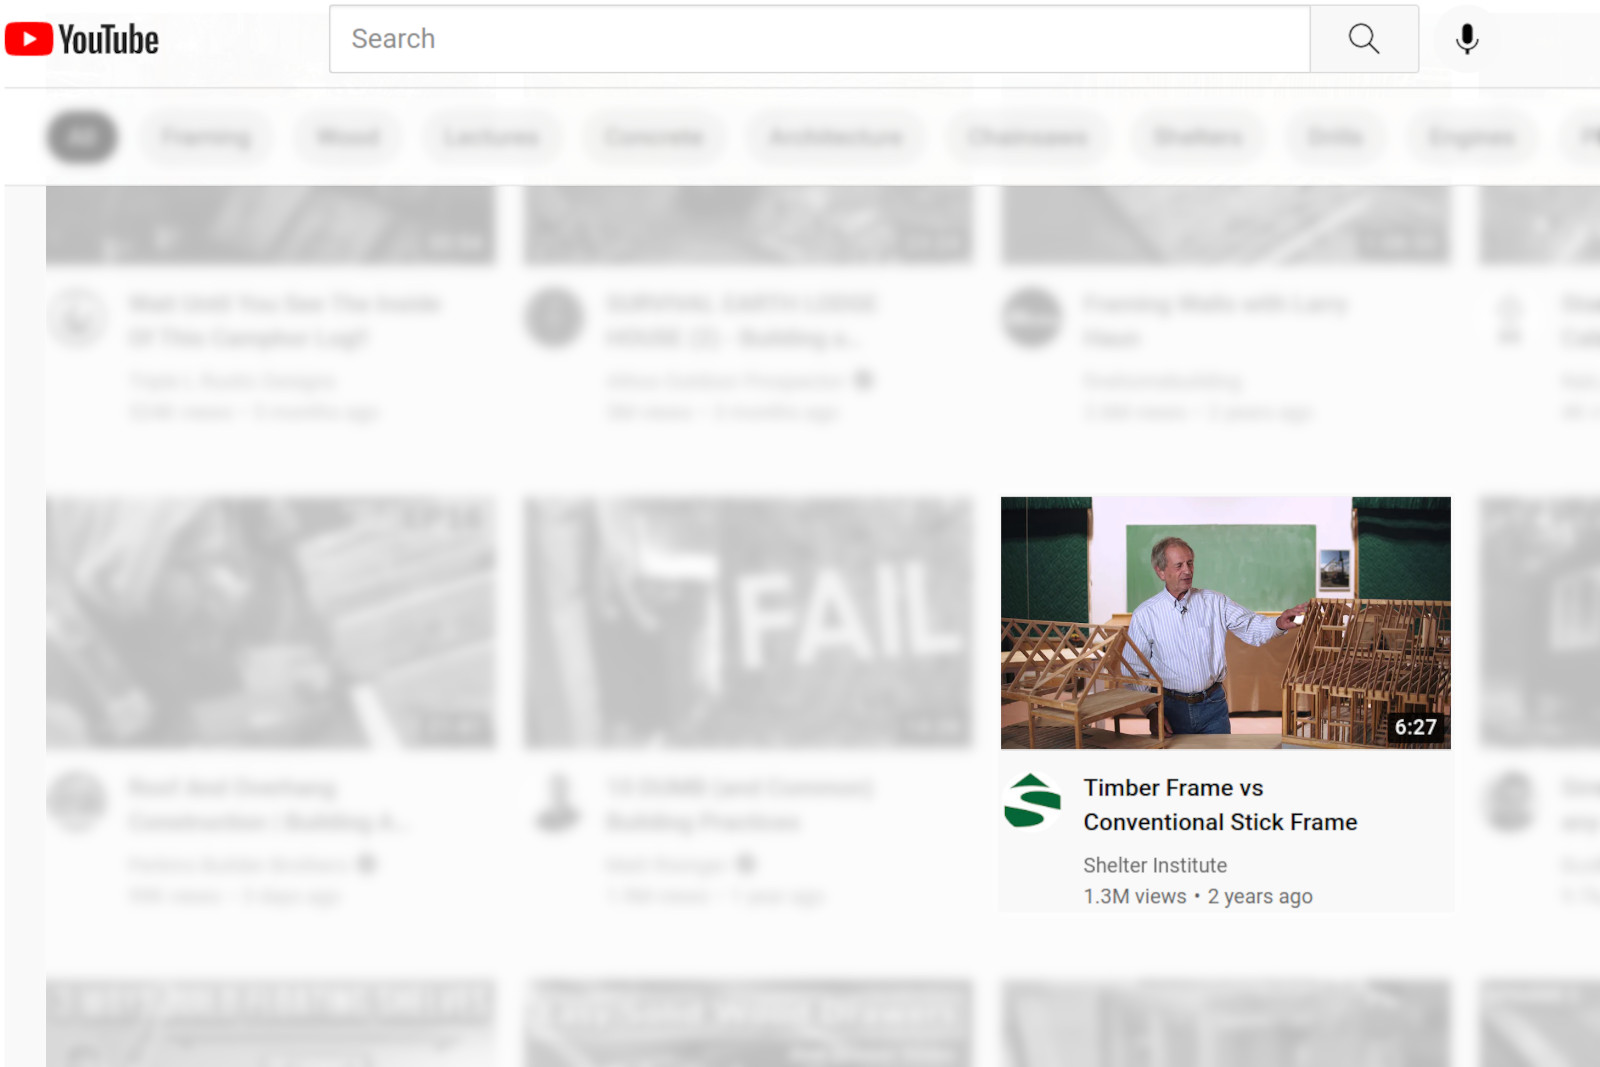 Screenshot of YouTube with Shelter Institute's 'Timber Frame vs Conventional Stick Frame' video thumbnail in focus